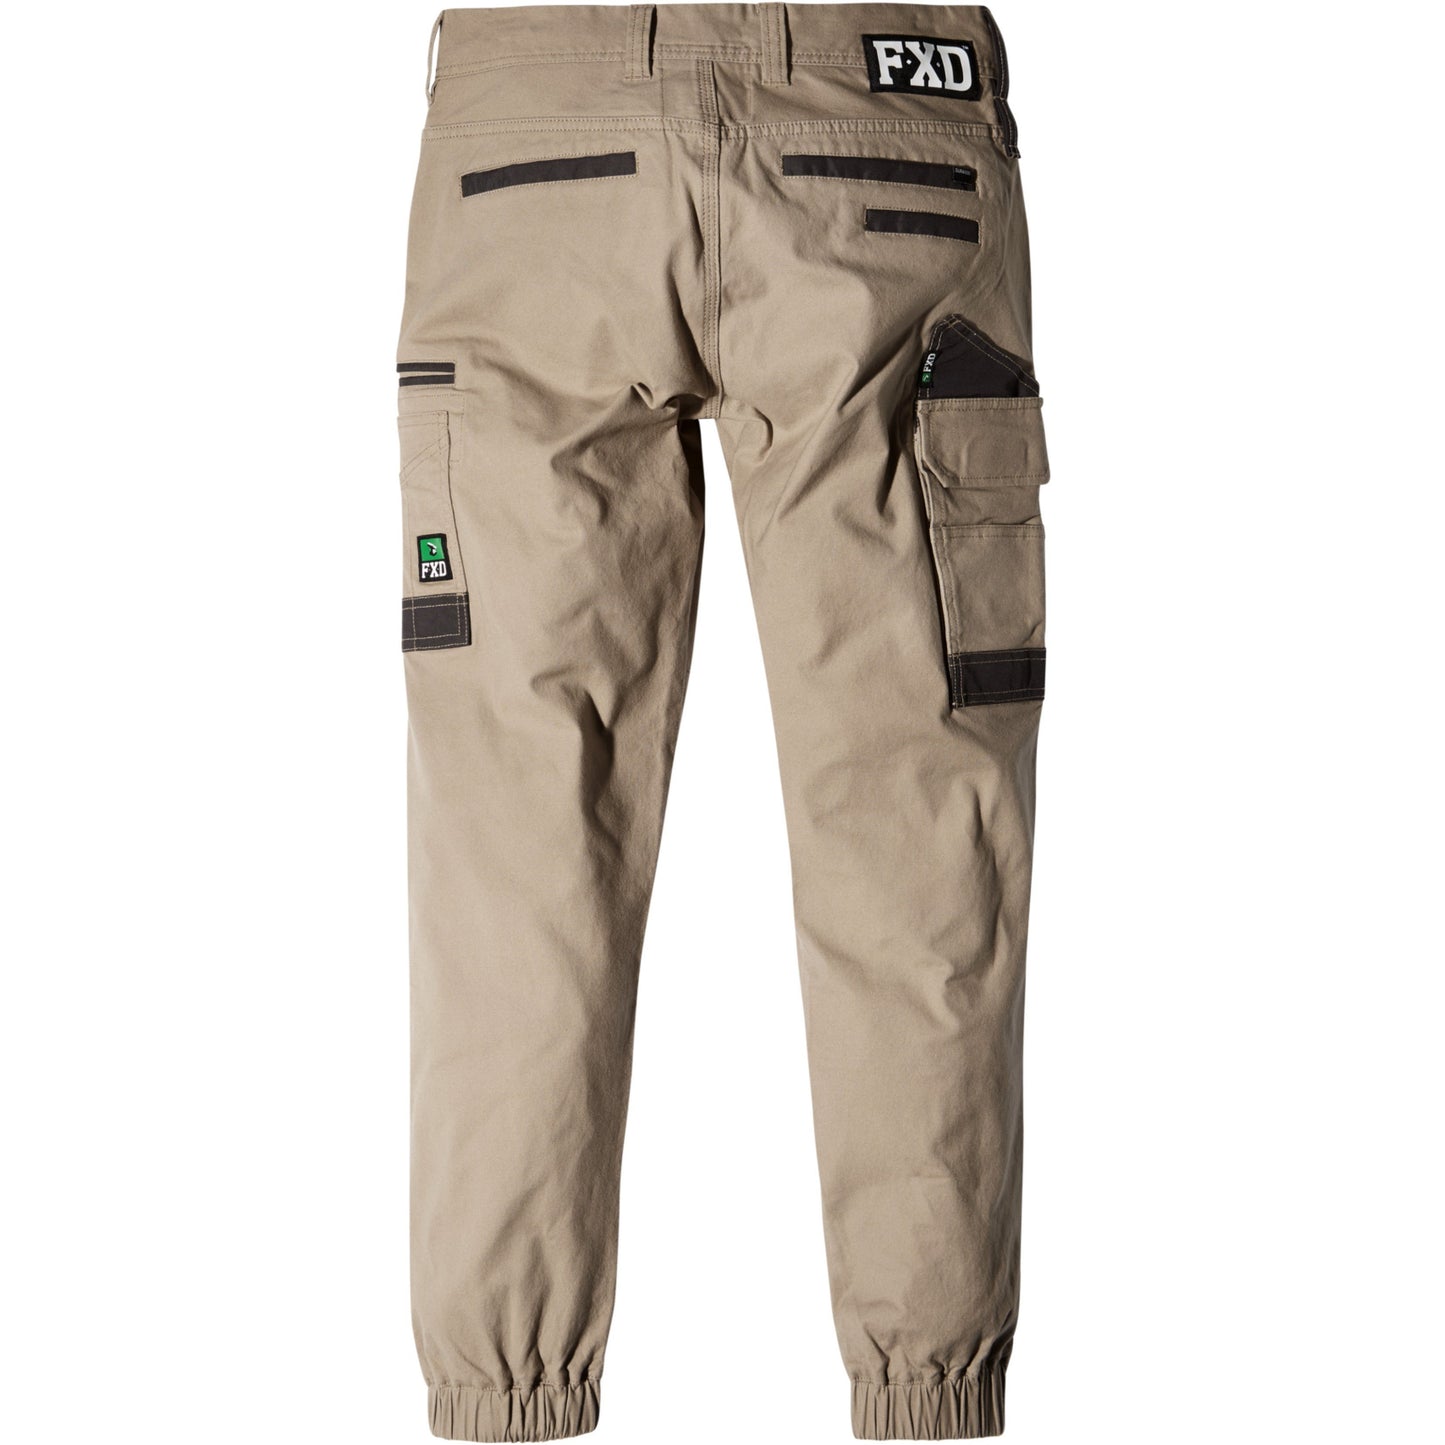 FXD WP4W Ladies Stretch Work Cargo Pants With Cuff